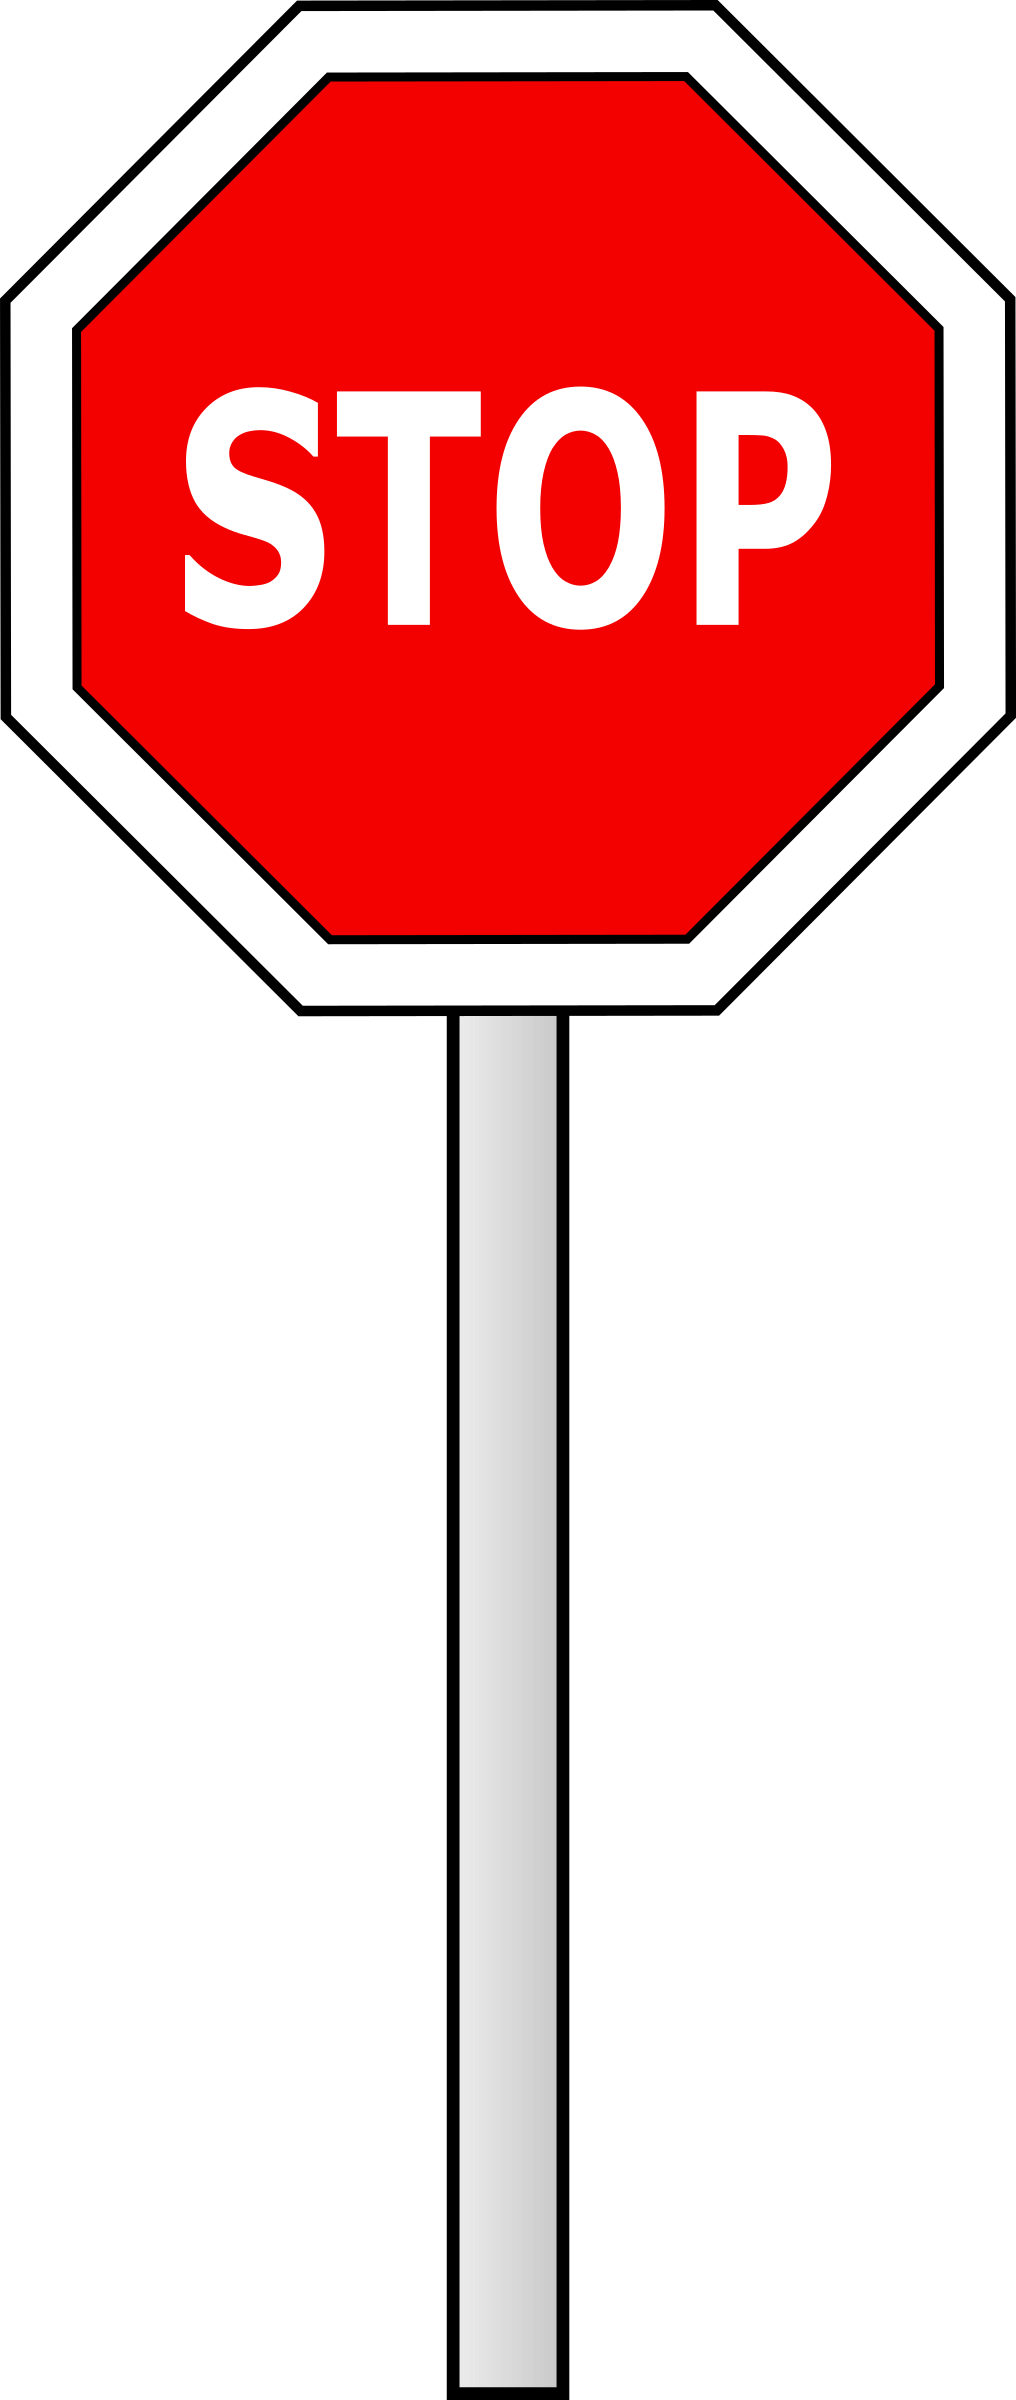 microsoft clipart stop sign - photo #26